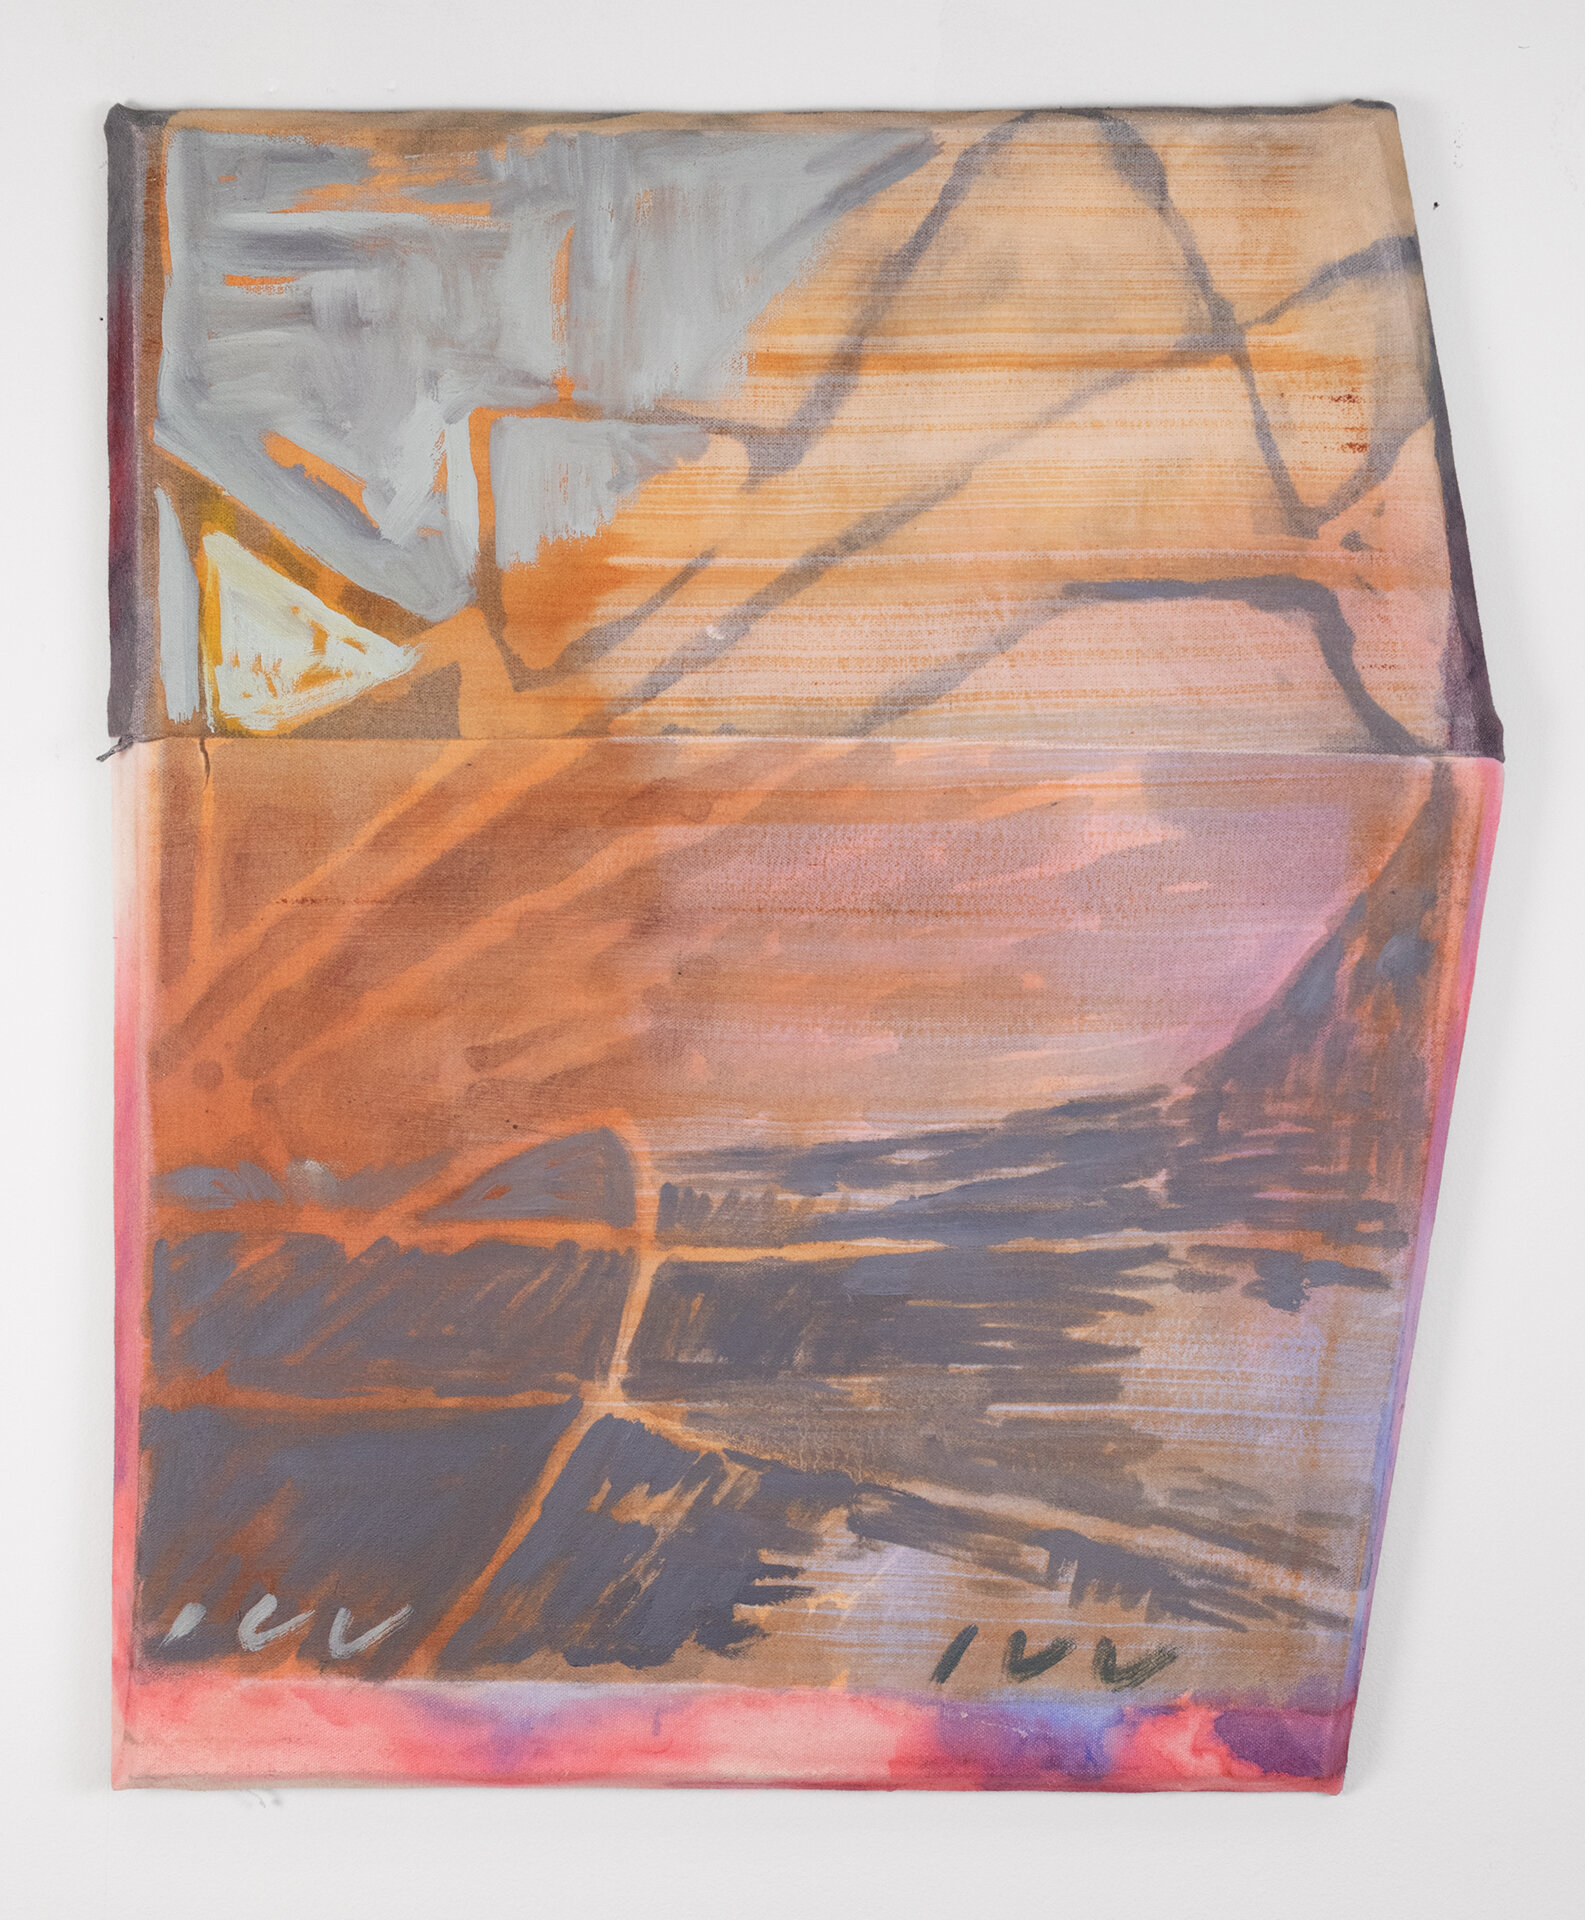   Two Dactyls   21.5 x 16 in (dimensions variable)  Oil, acrylic, and dye on sewn canvas  2019    